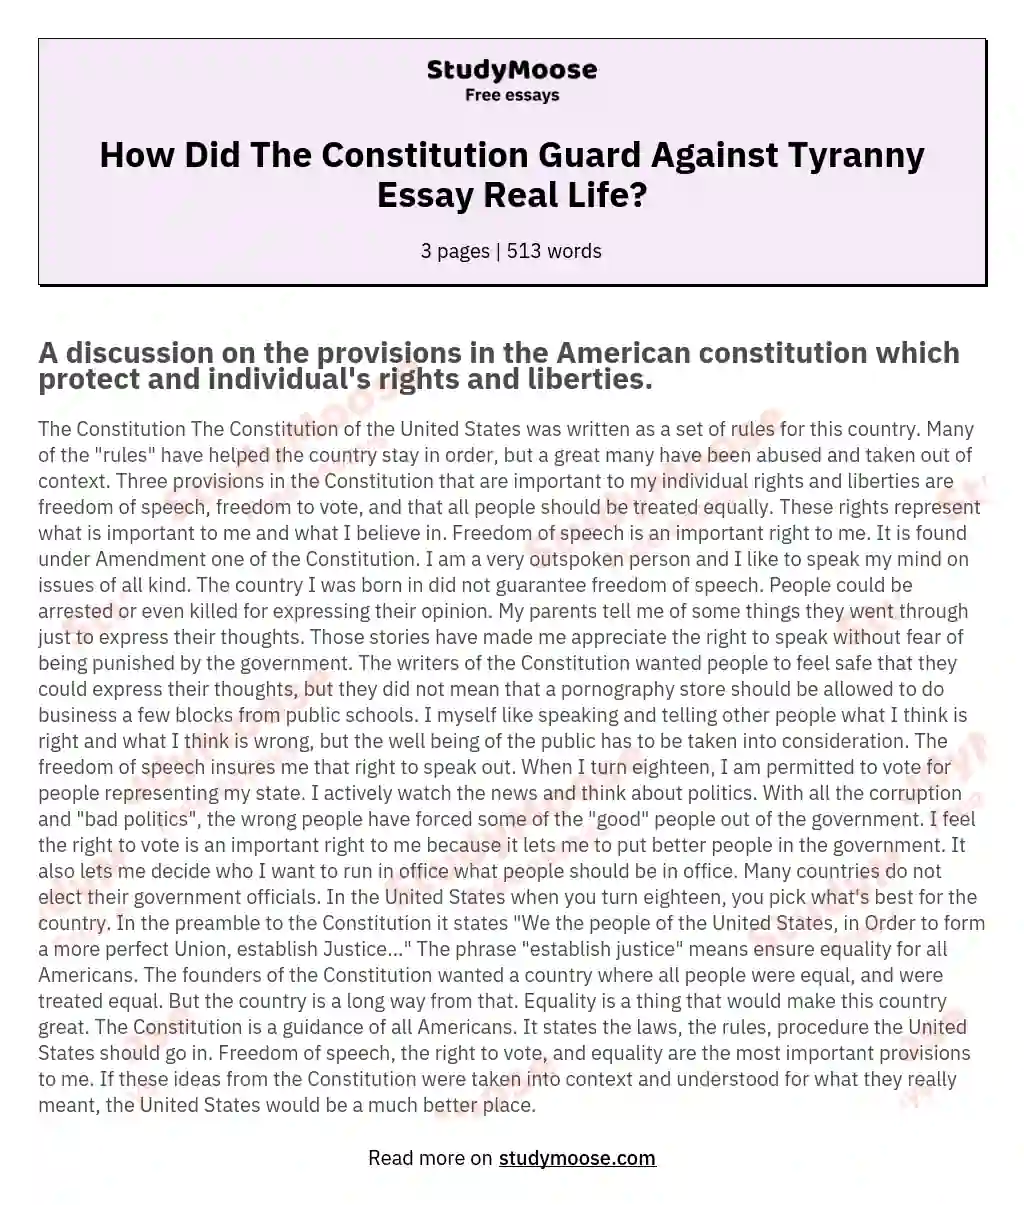 How Did The Constitution Guard Against Tyranny Essay Real Life? essay